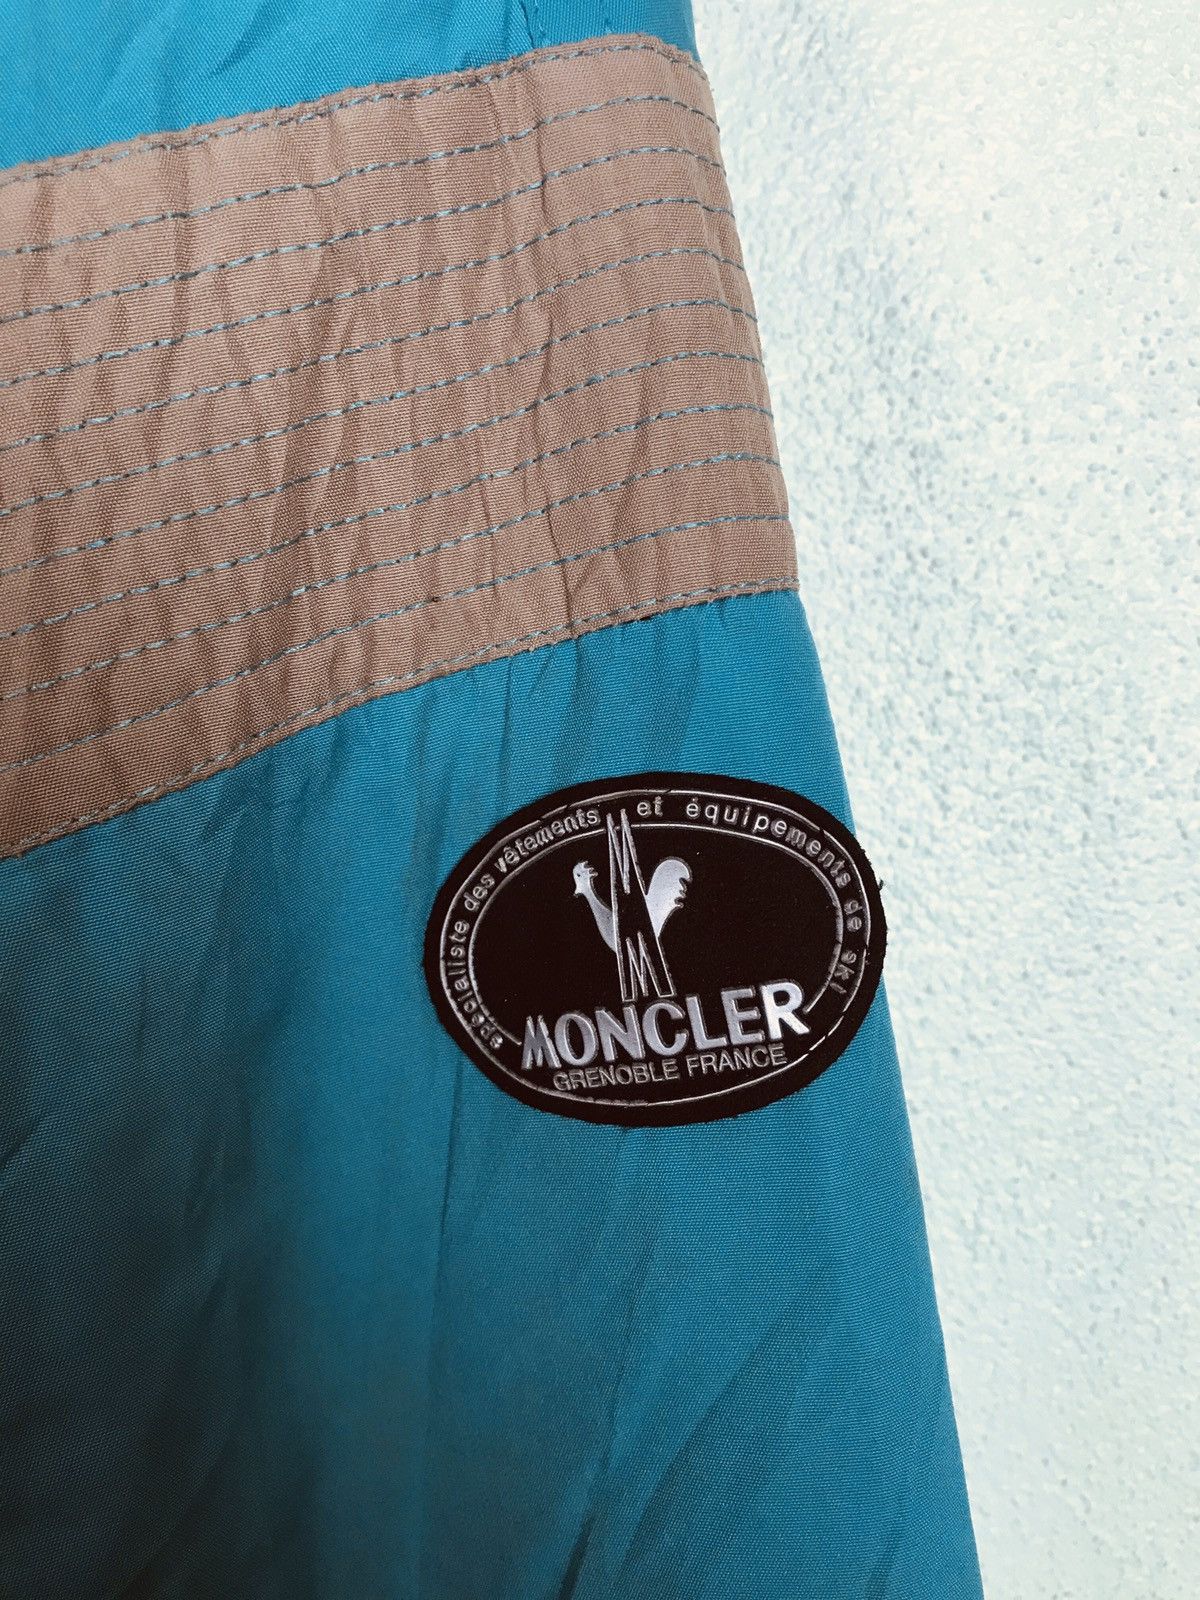 Moncler ski wear thinsulate down overall - gh1519 - 3